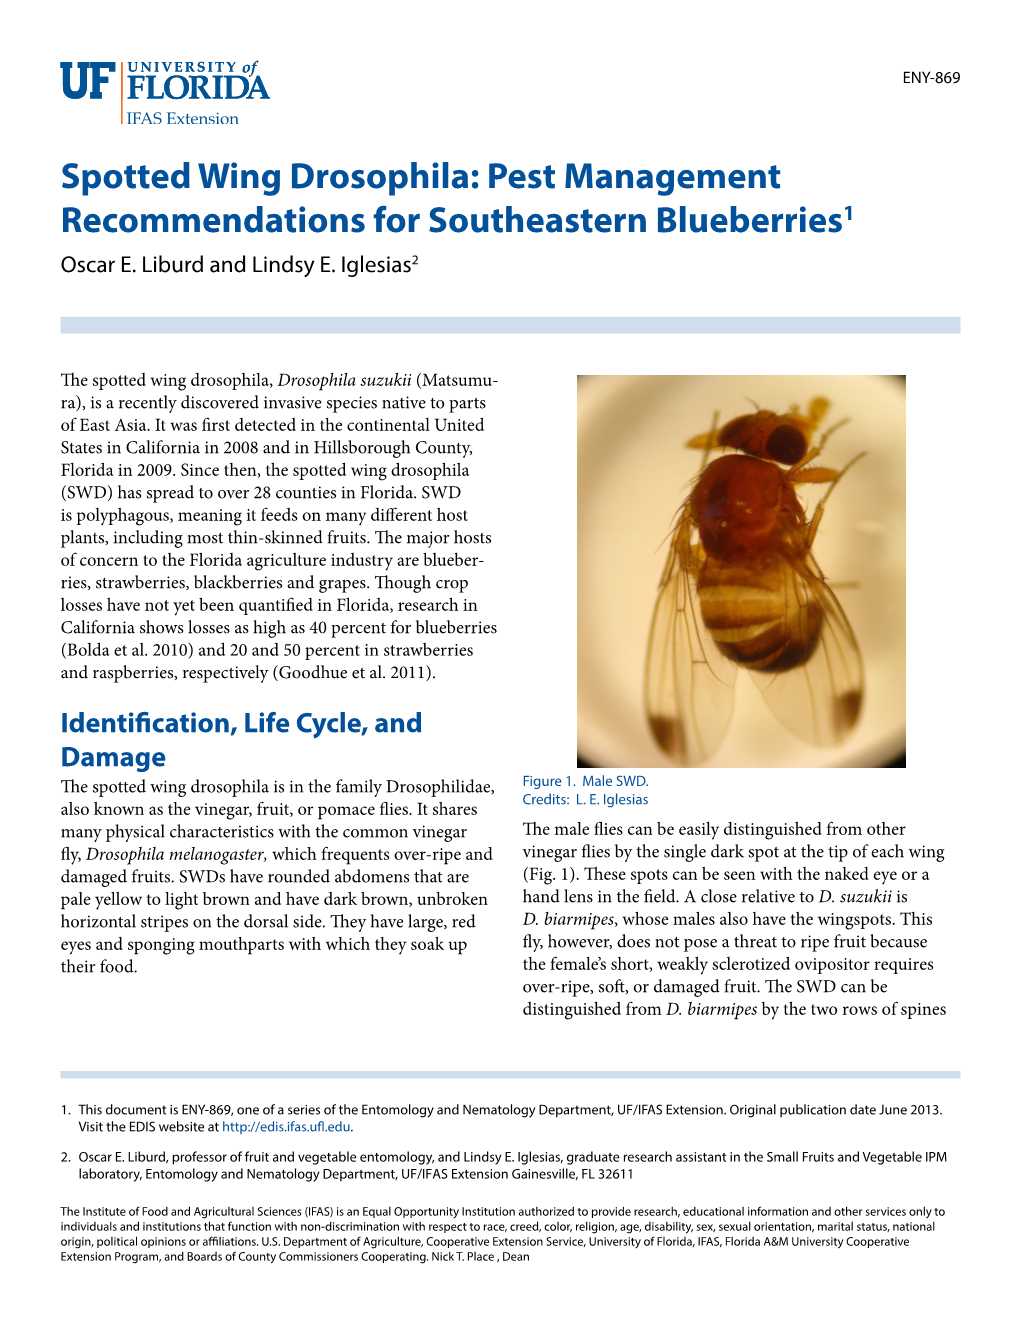 Spotted Wing Drosophila: Pest Management Recommendations for Southeastern Blueberries1 Oscar E